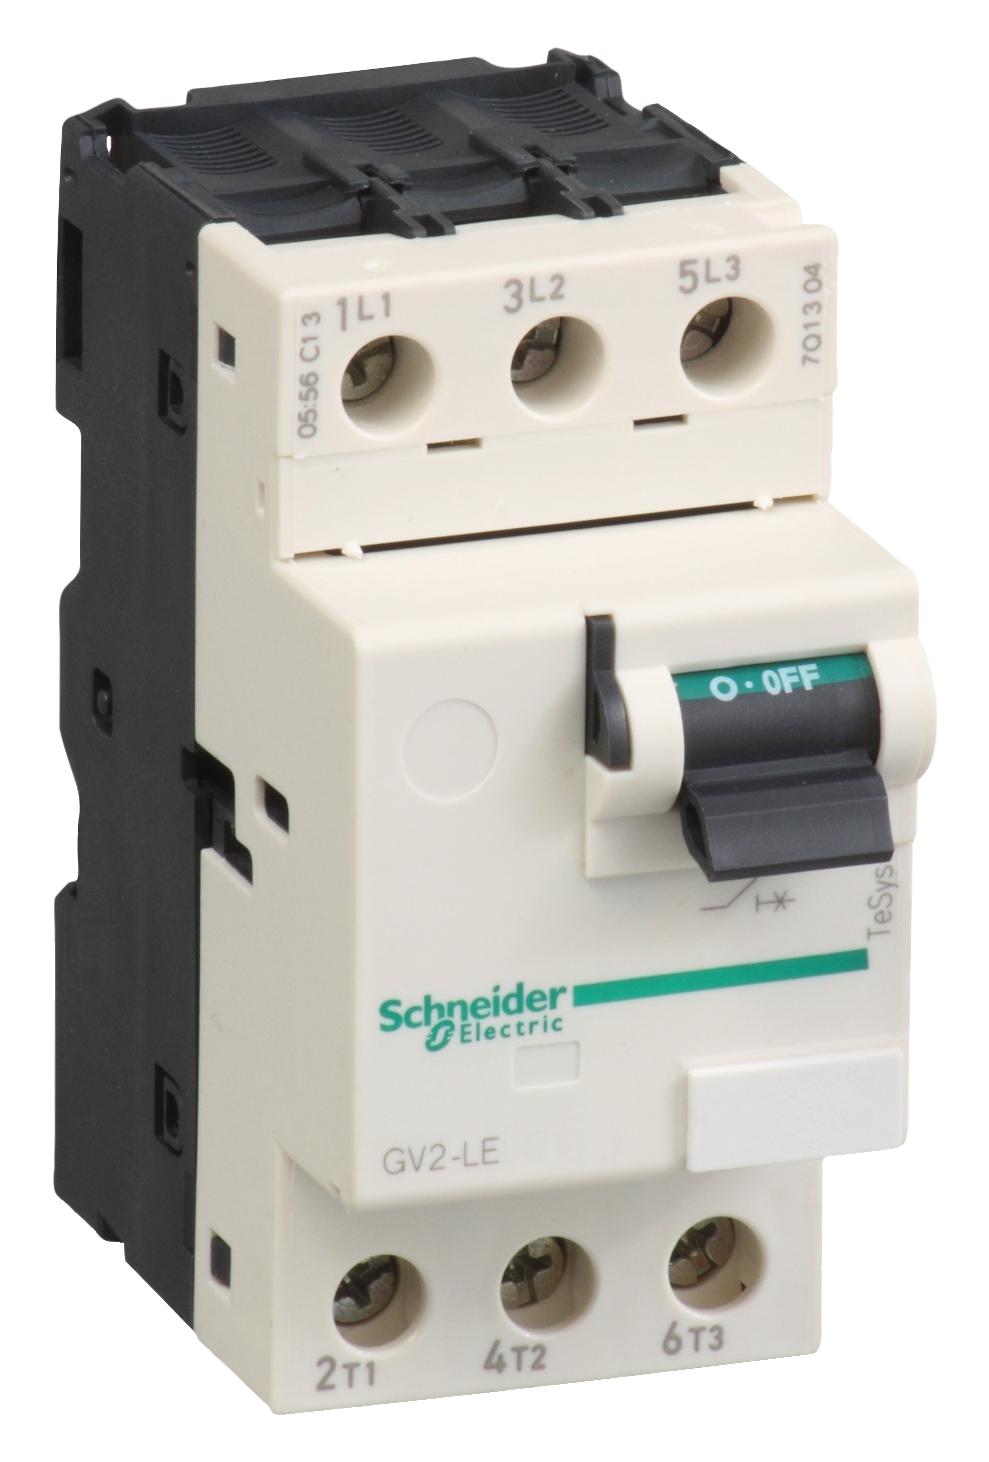 GV2LE07 THERMOMAGNETIC CKT BREAKER, 3P, 2.5A SCHNEIDER ELECTRIC